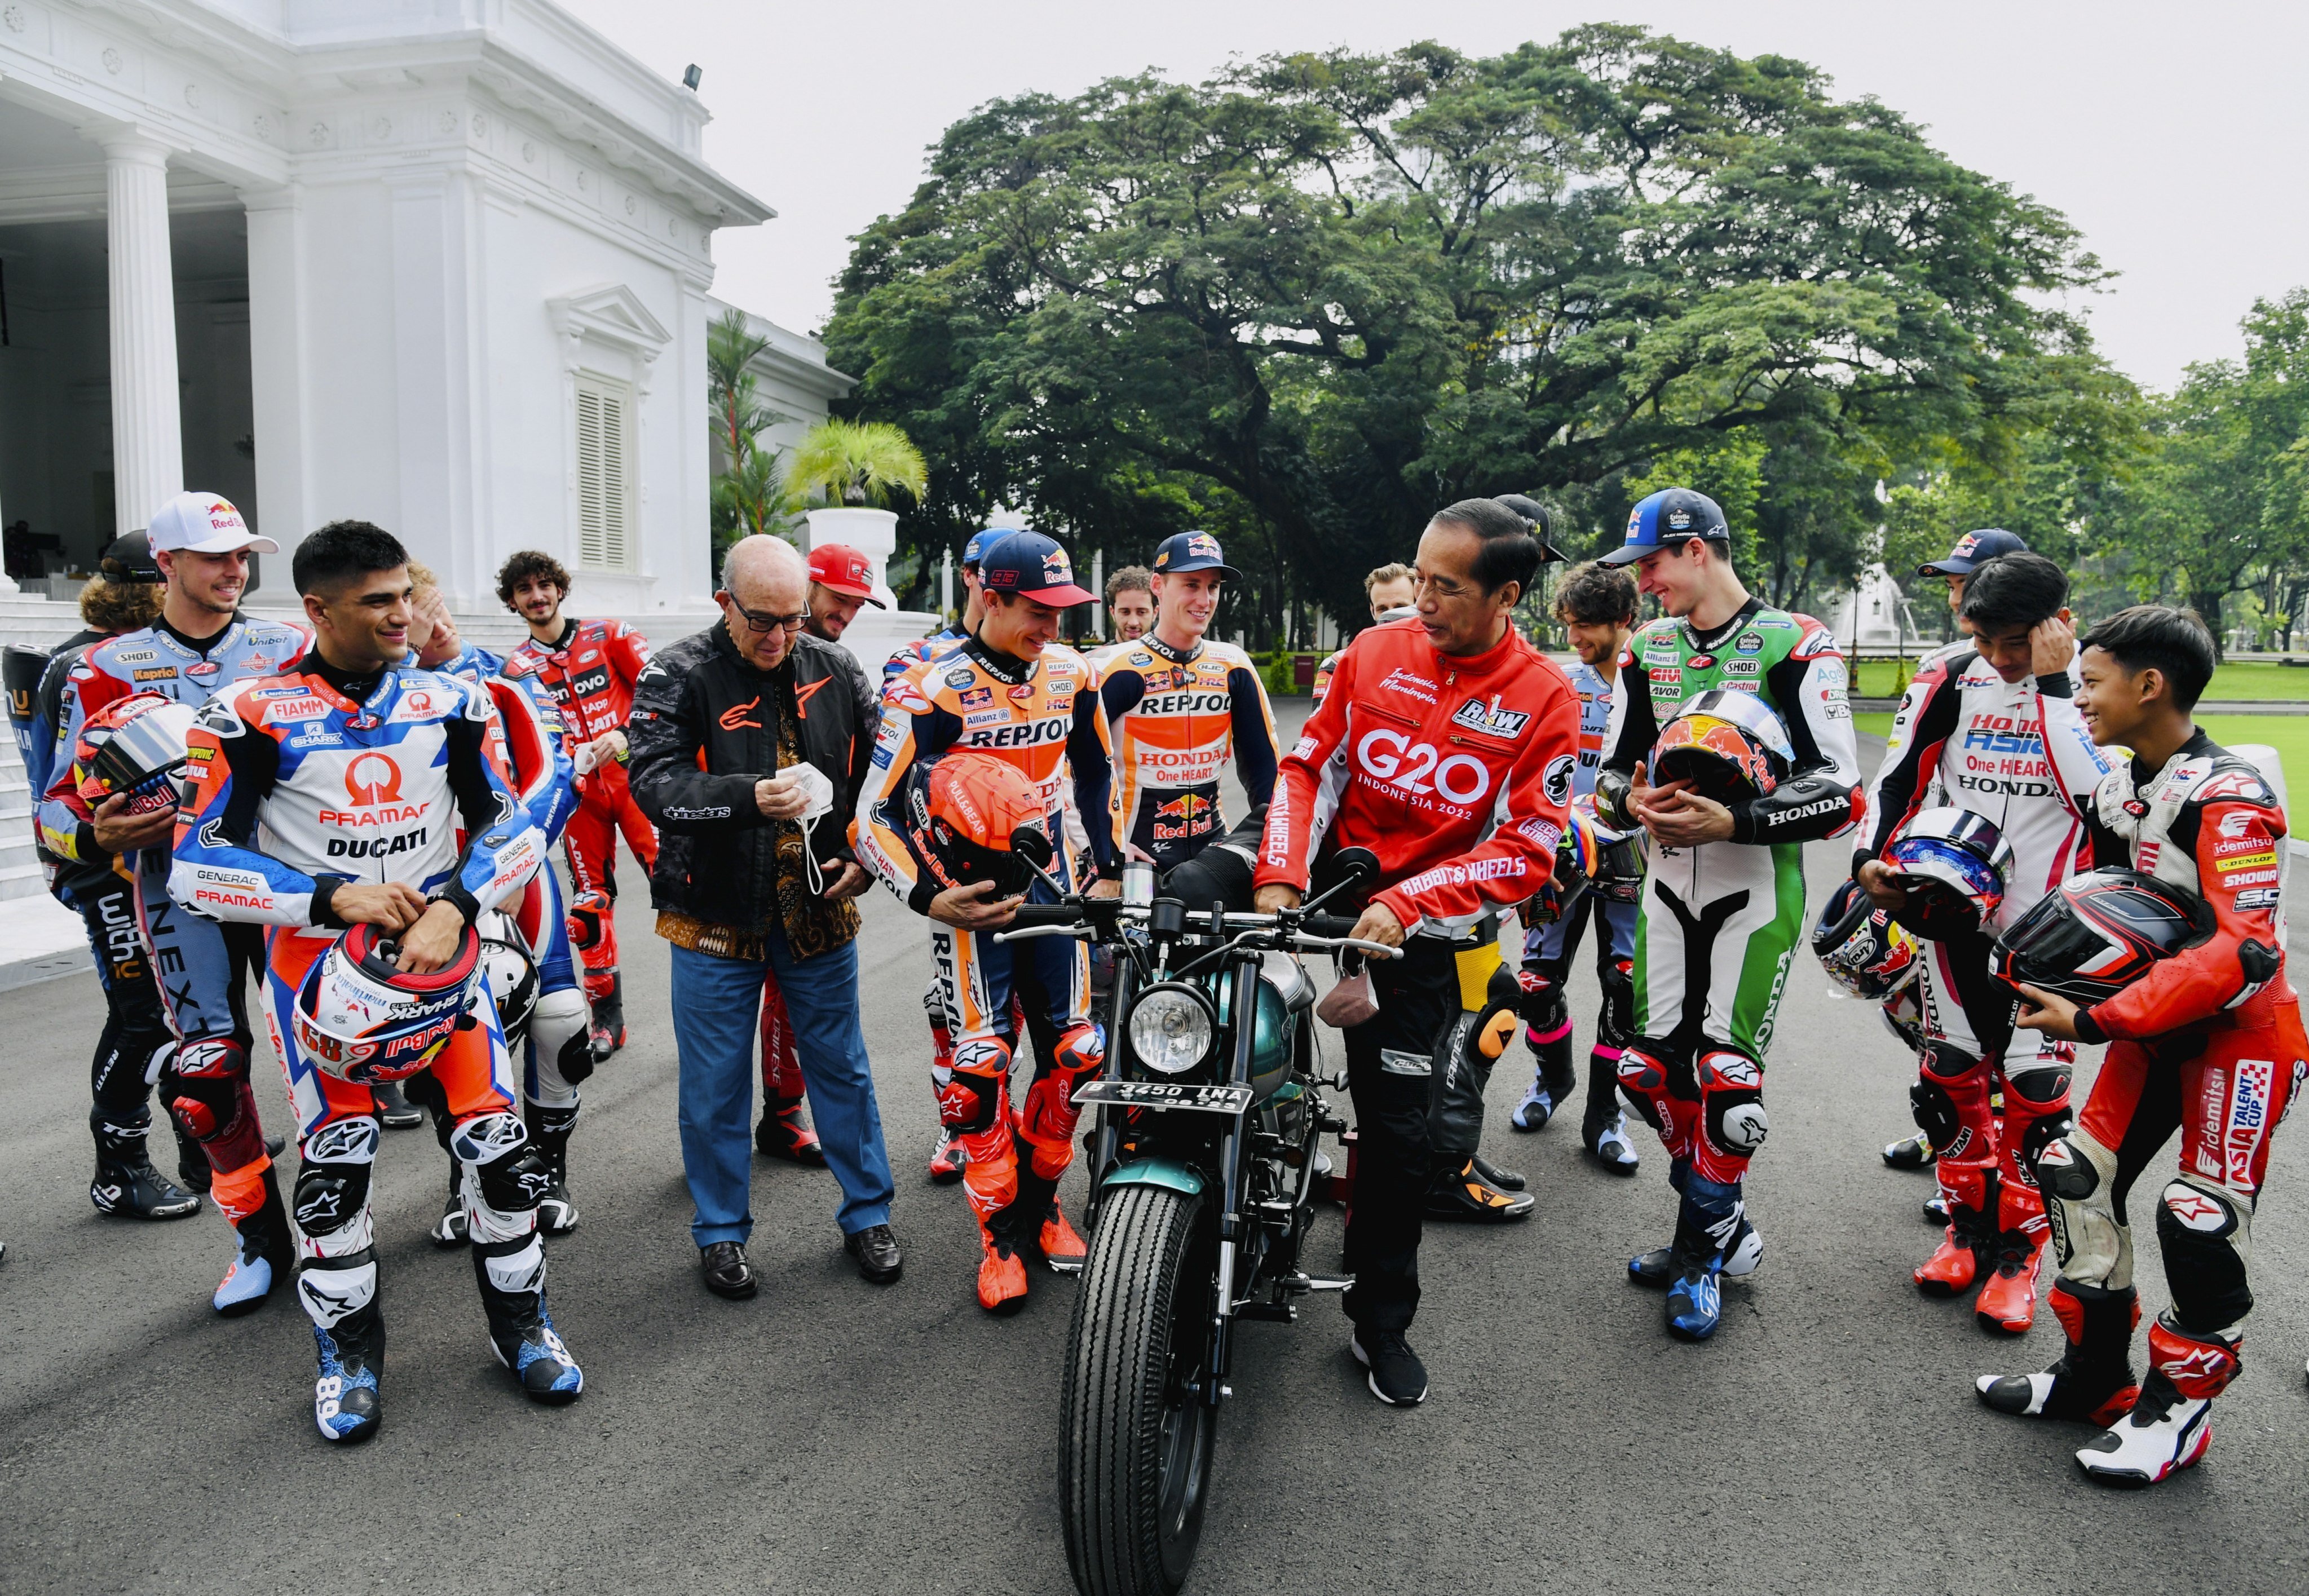 Indonesia’s President Joko Widodo (C) and his motorbike during a meeting with MotoGP riders in Jakarta on Wednesday. The 
nation hosts a MotoGP race at the new Mandalika circuit on the island of Lombok 18-20 March. Photo: EPA-EFE